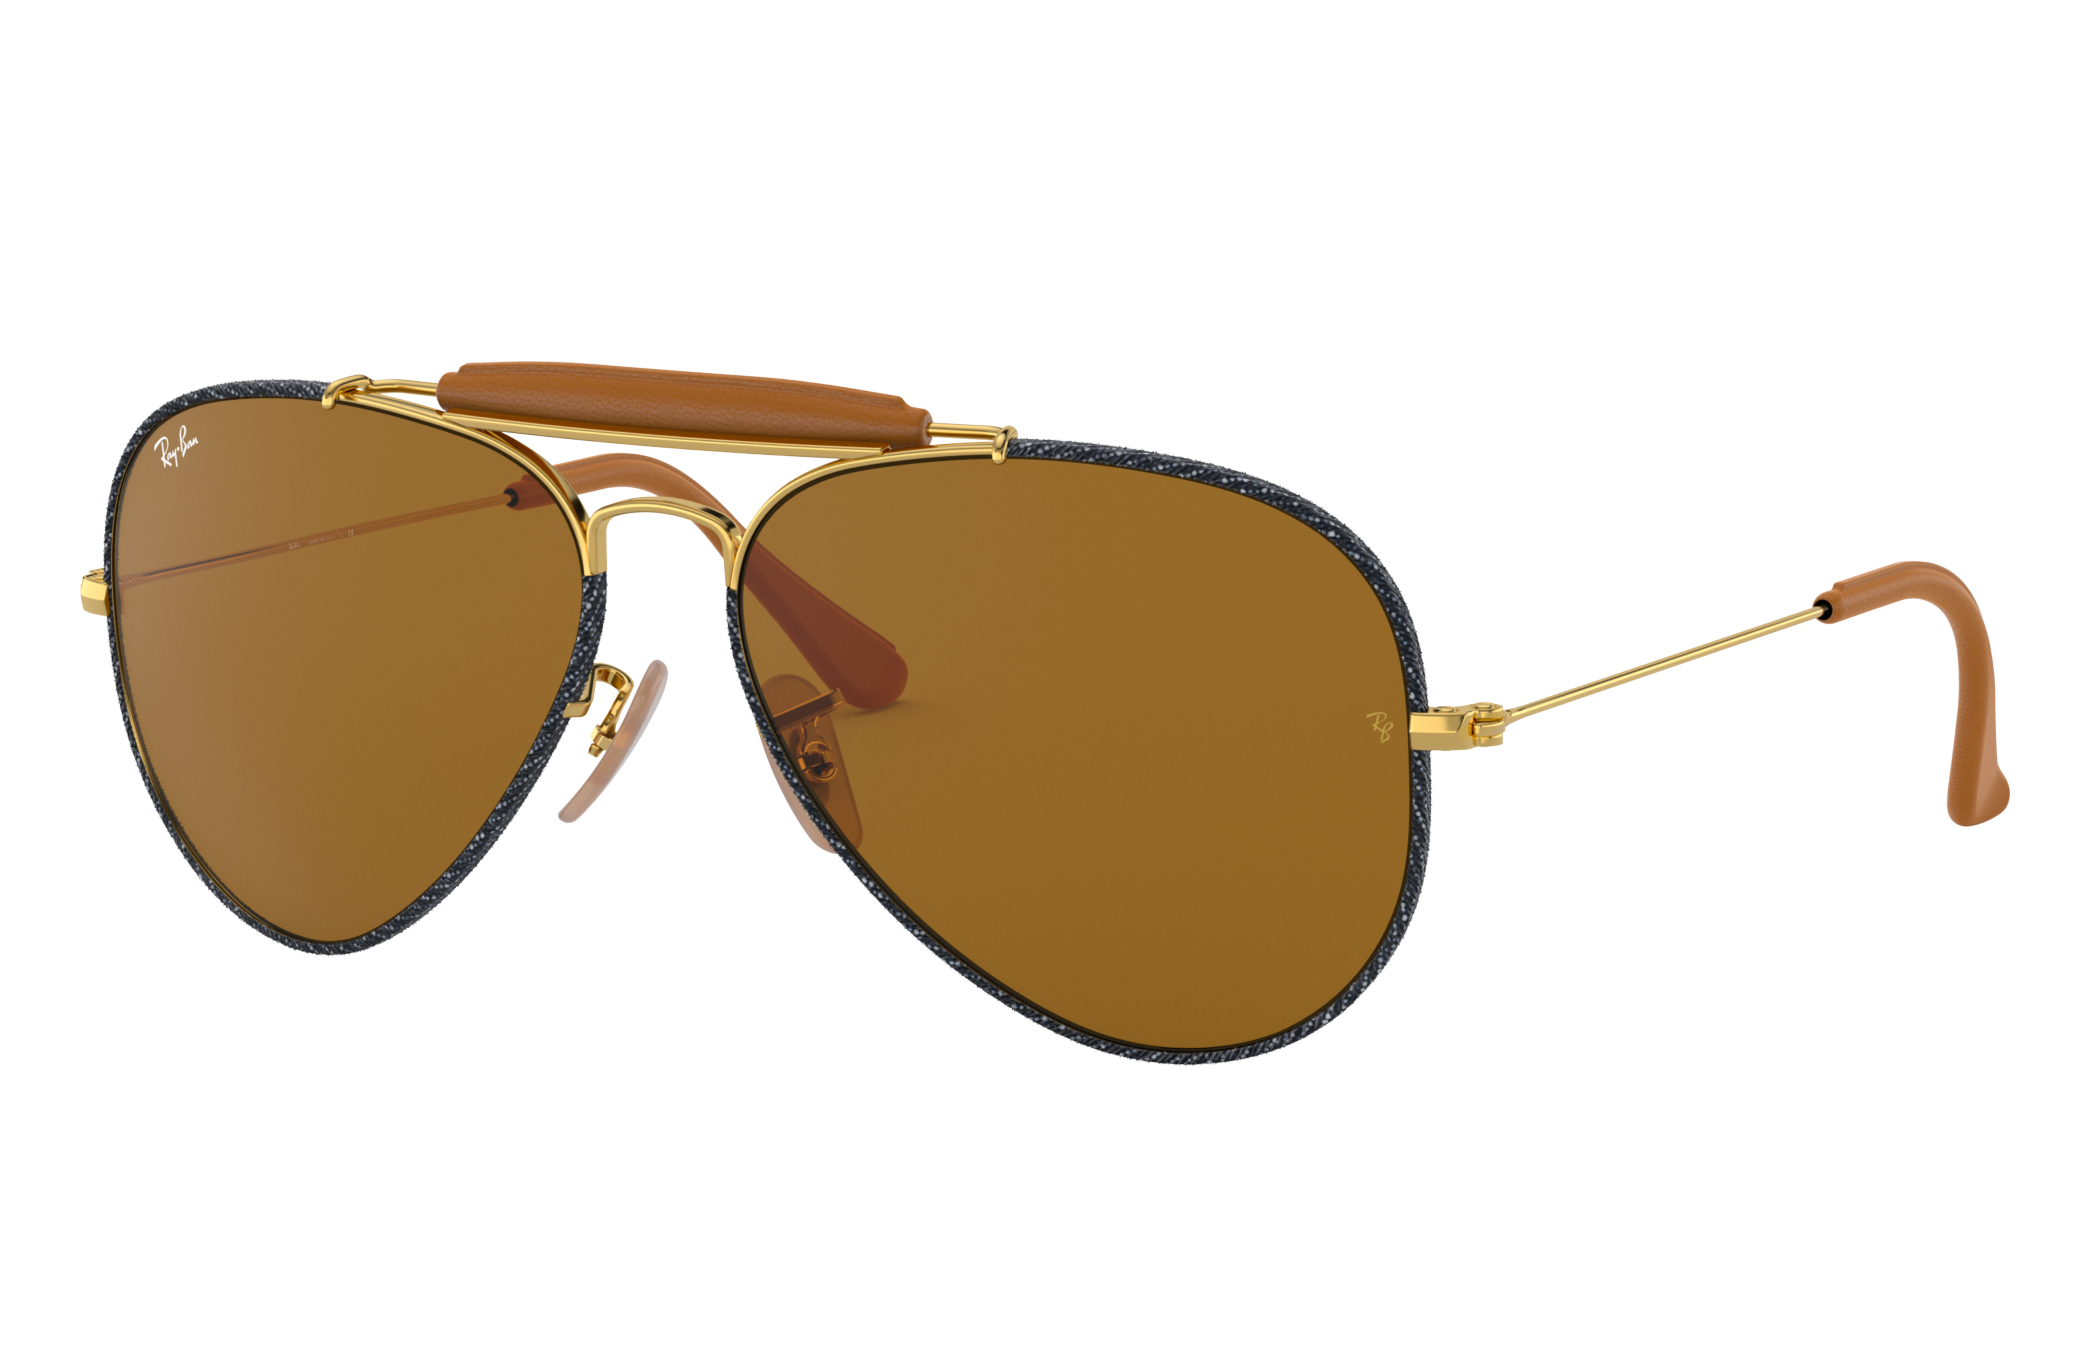 Aviator Craft Sunglasses in Blue Denim and Brown | Ray-Ban®